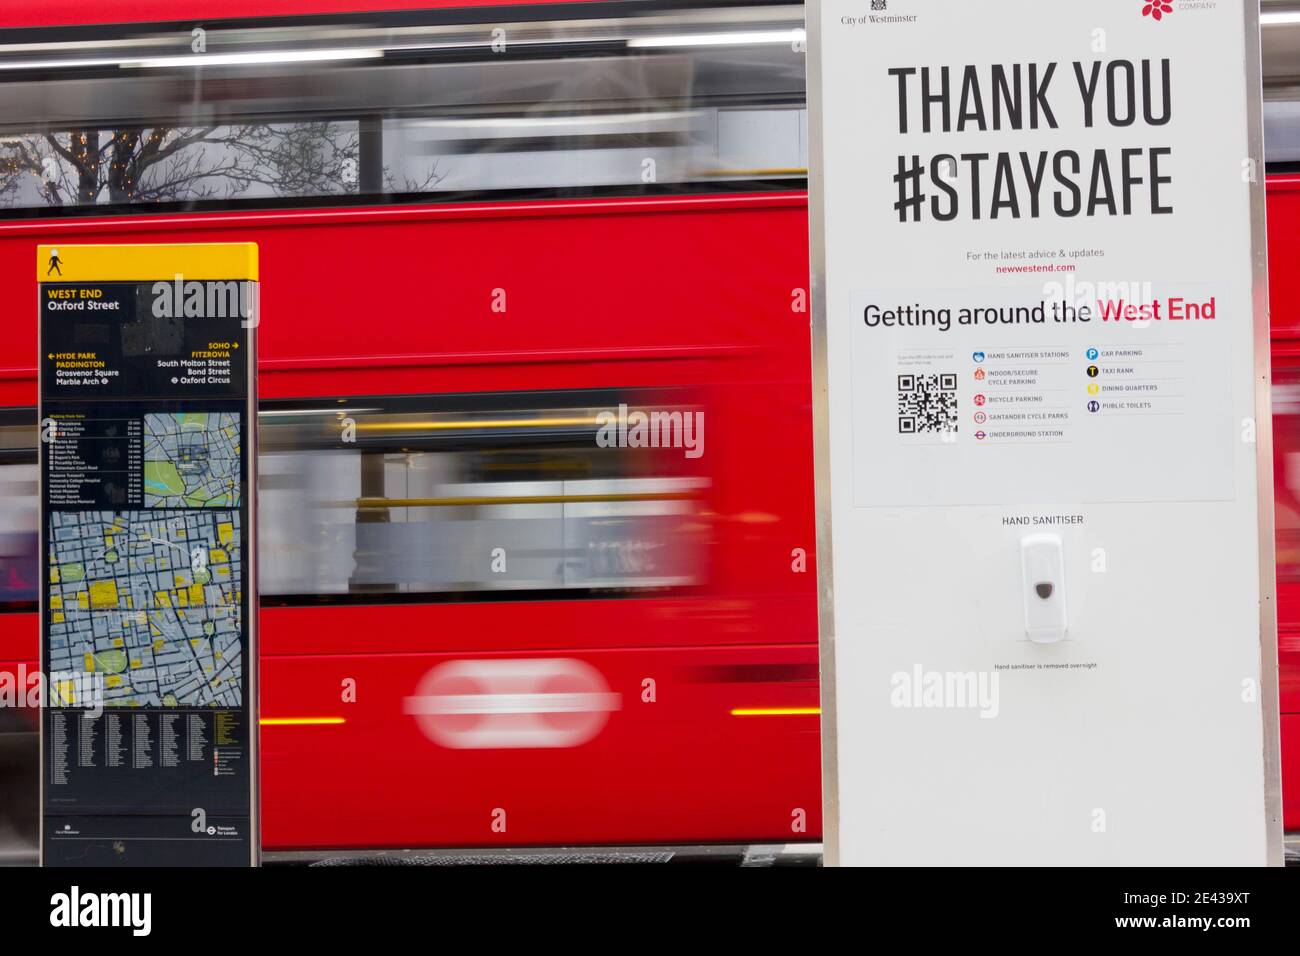 thank you #staysafe poster on oxford street in london west end Stock Photo